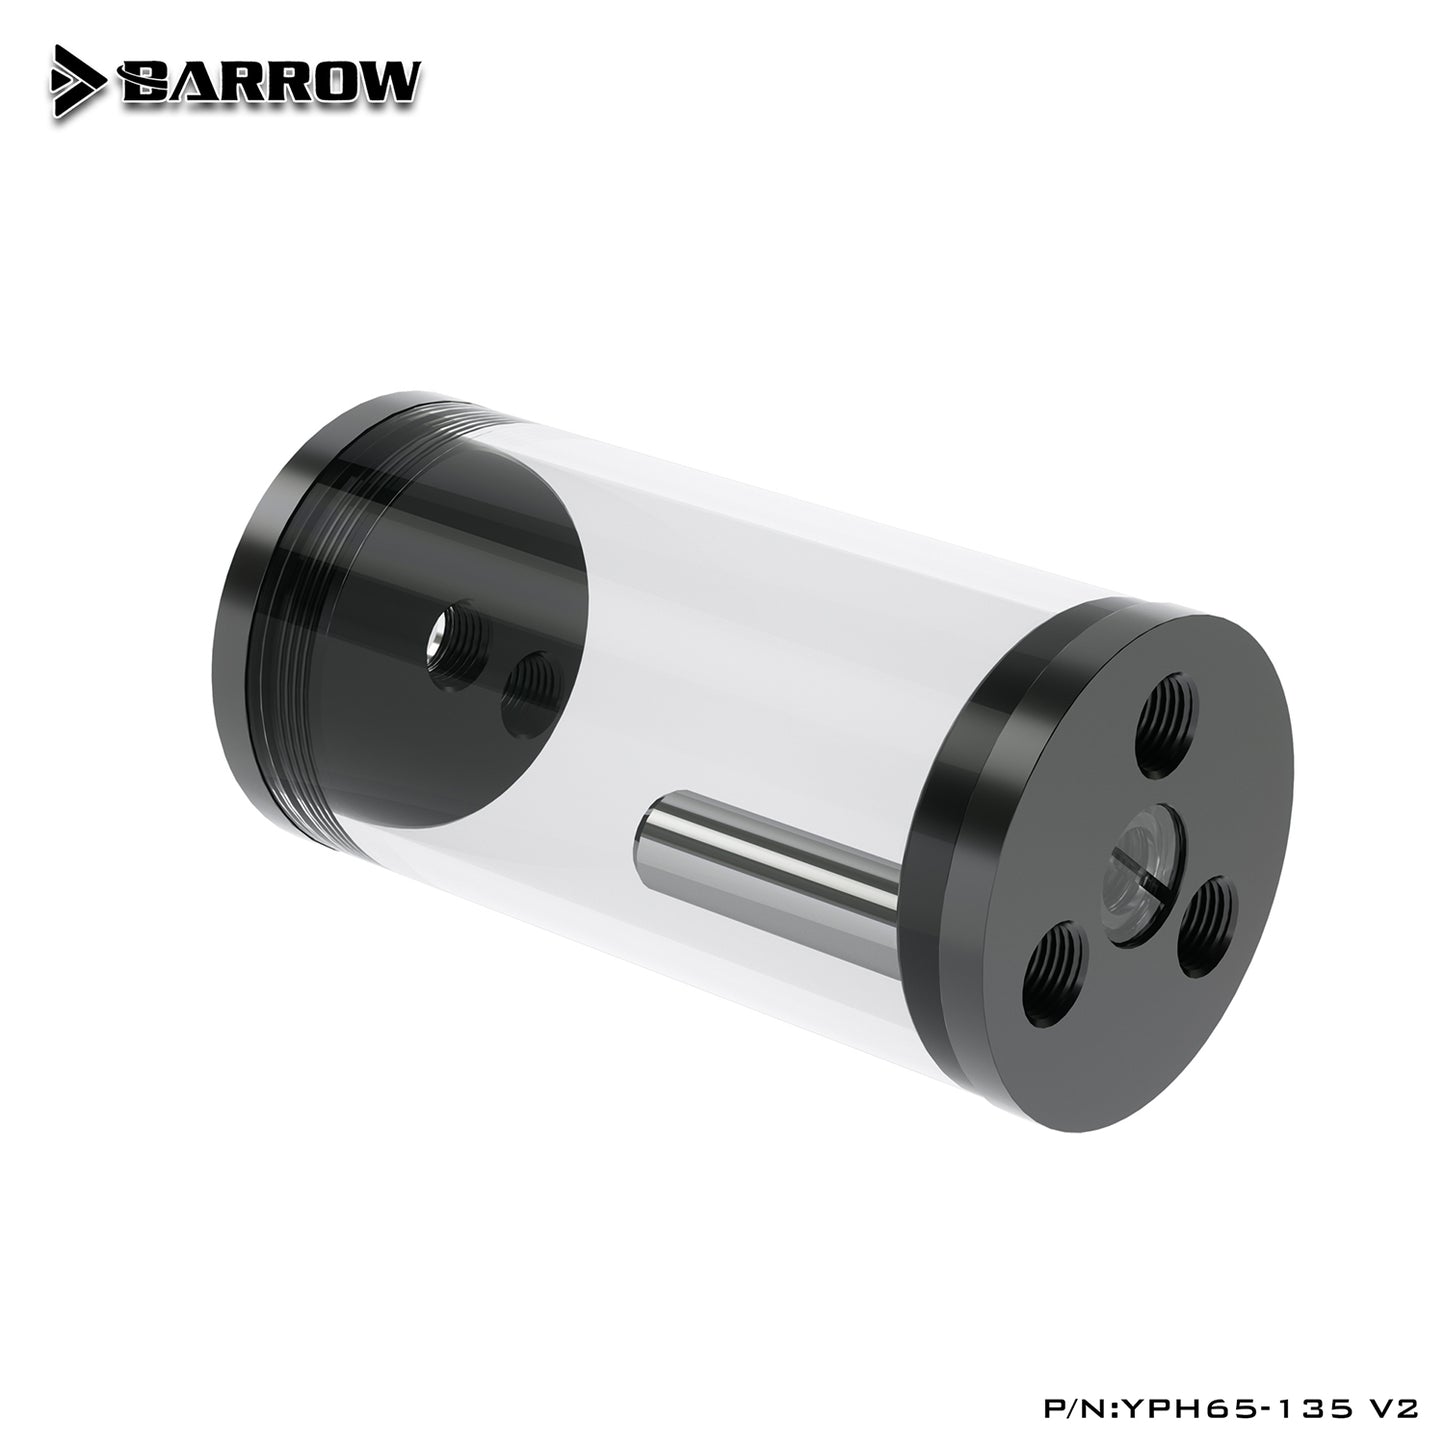 Barrow 65MM Diameter, Cylindrical Water Cooling Radiator Tank Pump, Extending Use Computer Water Cooling, YPH65 V2